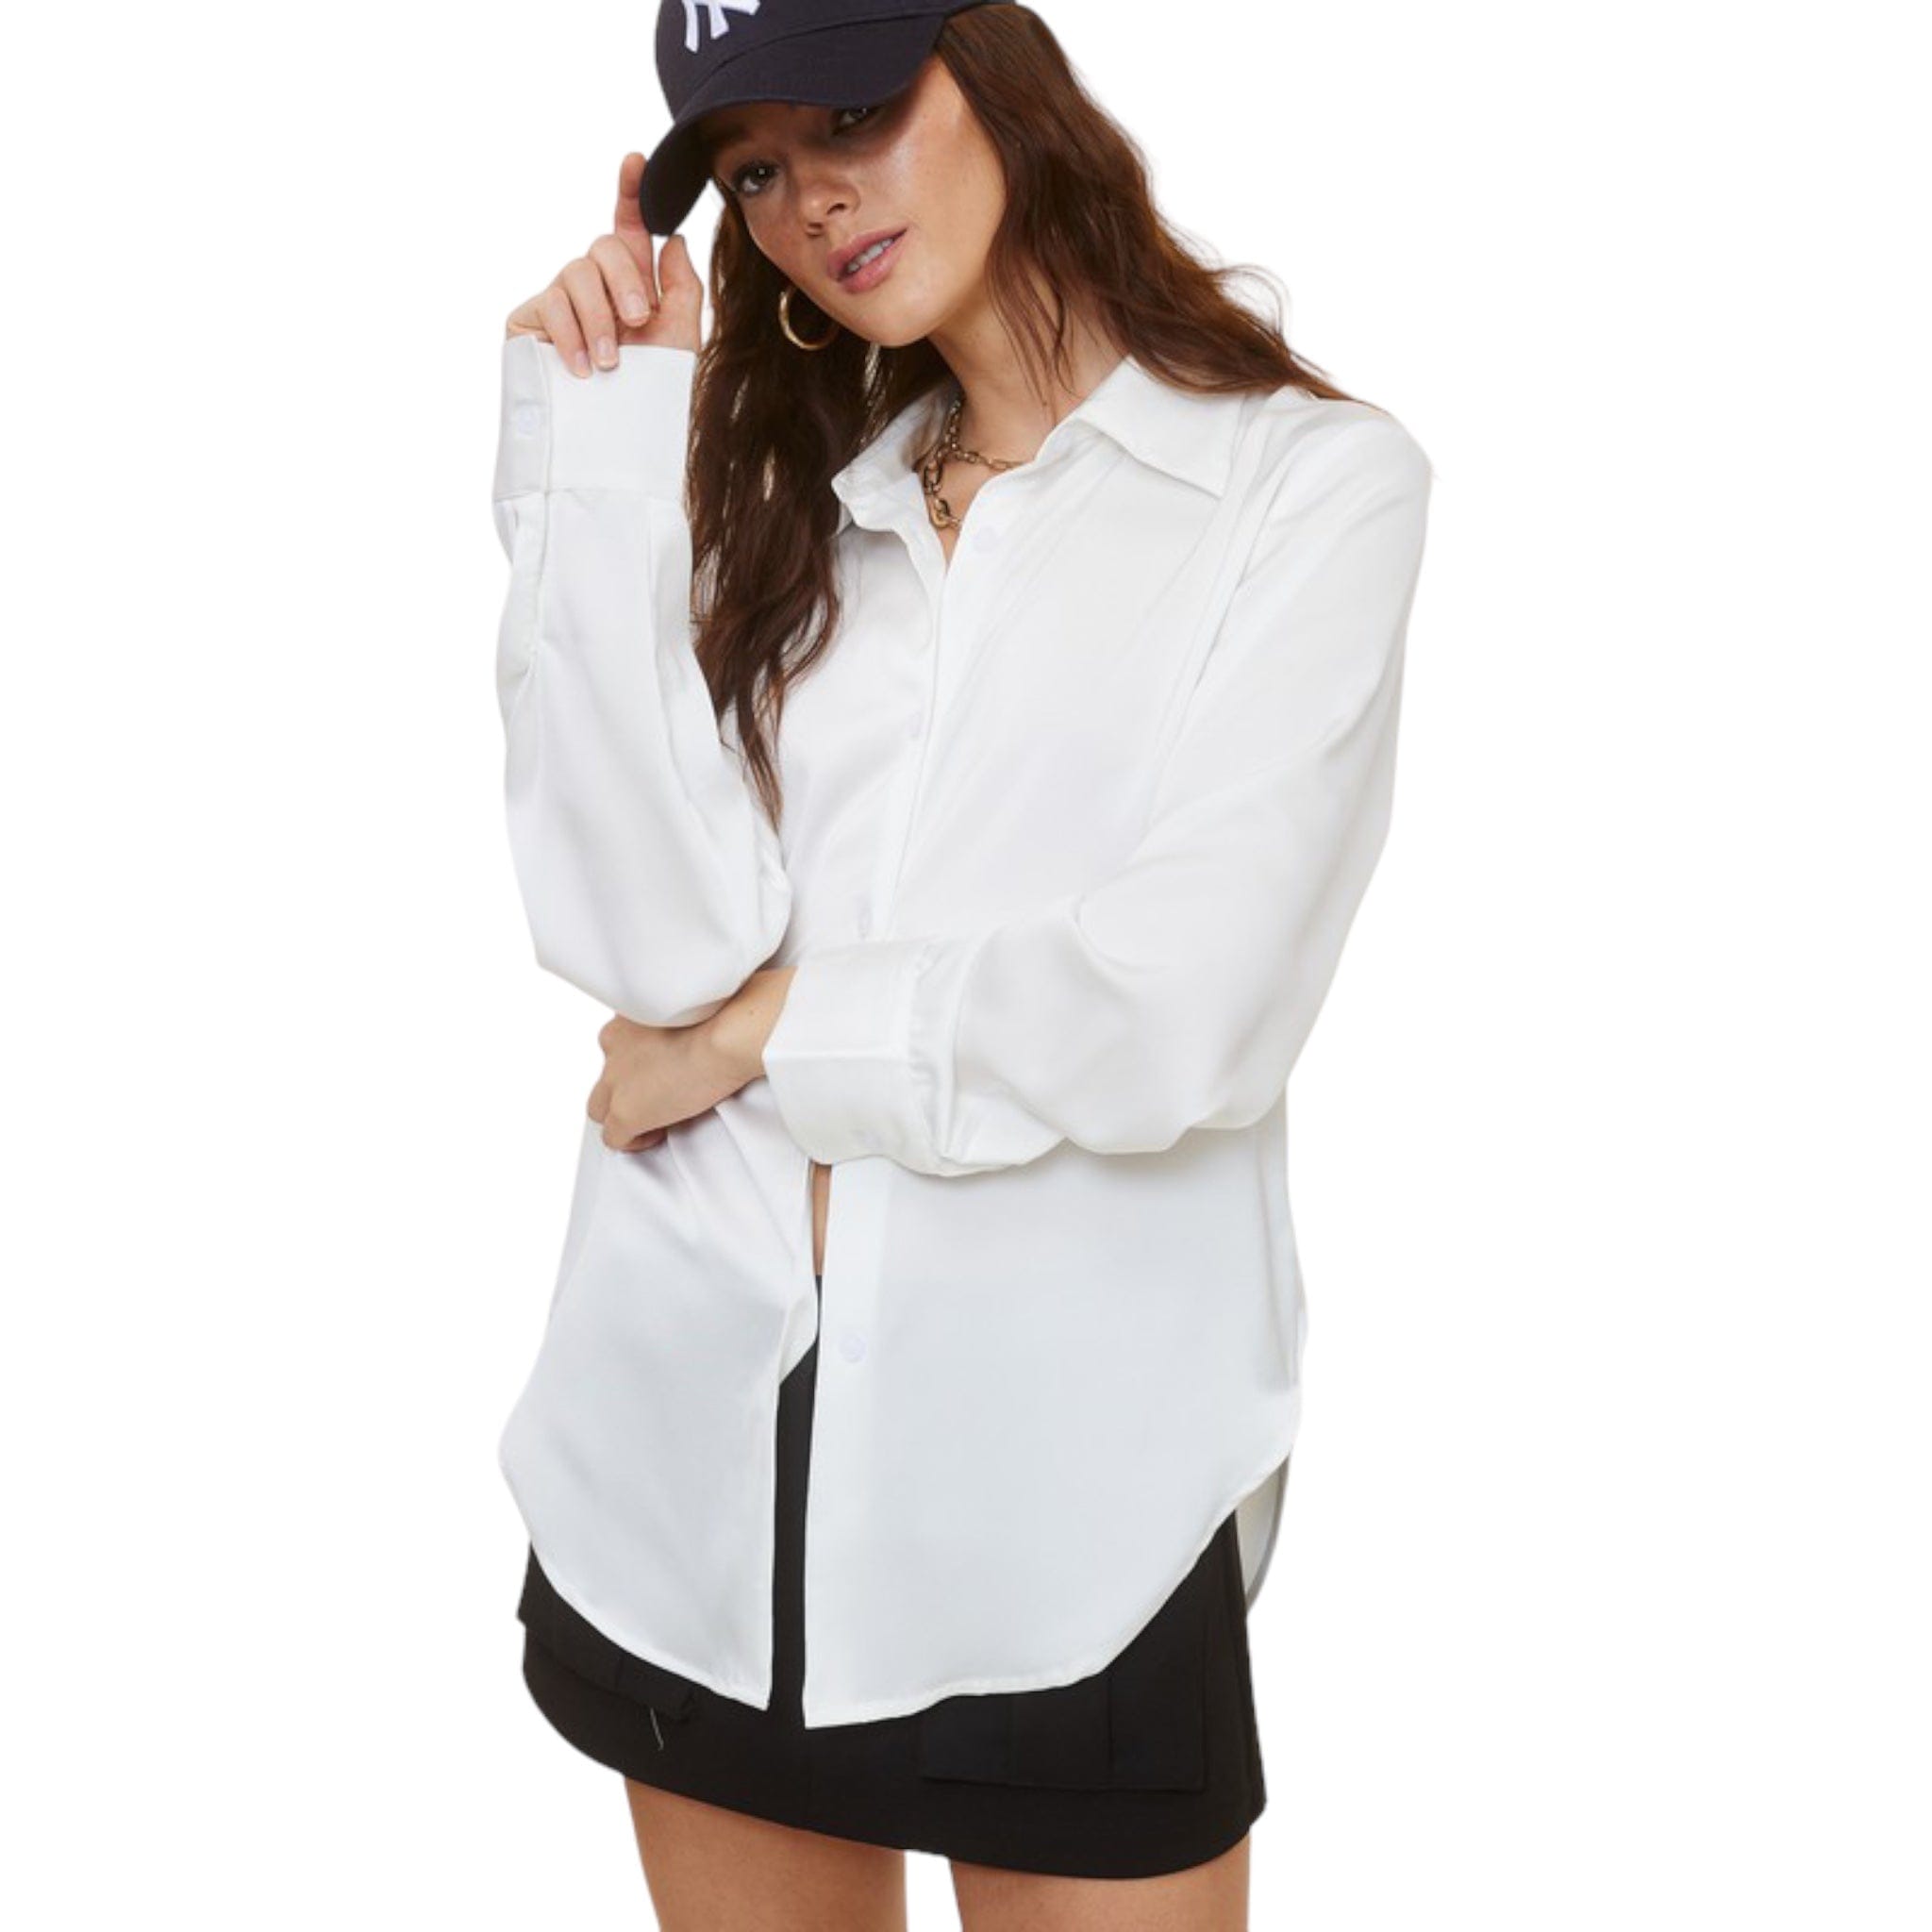 Silk Button Down Top in Black and White